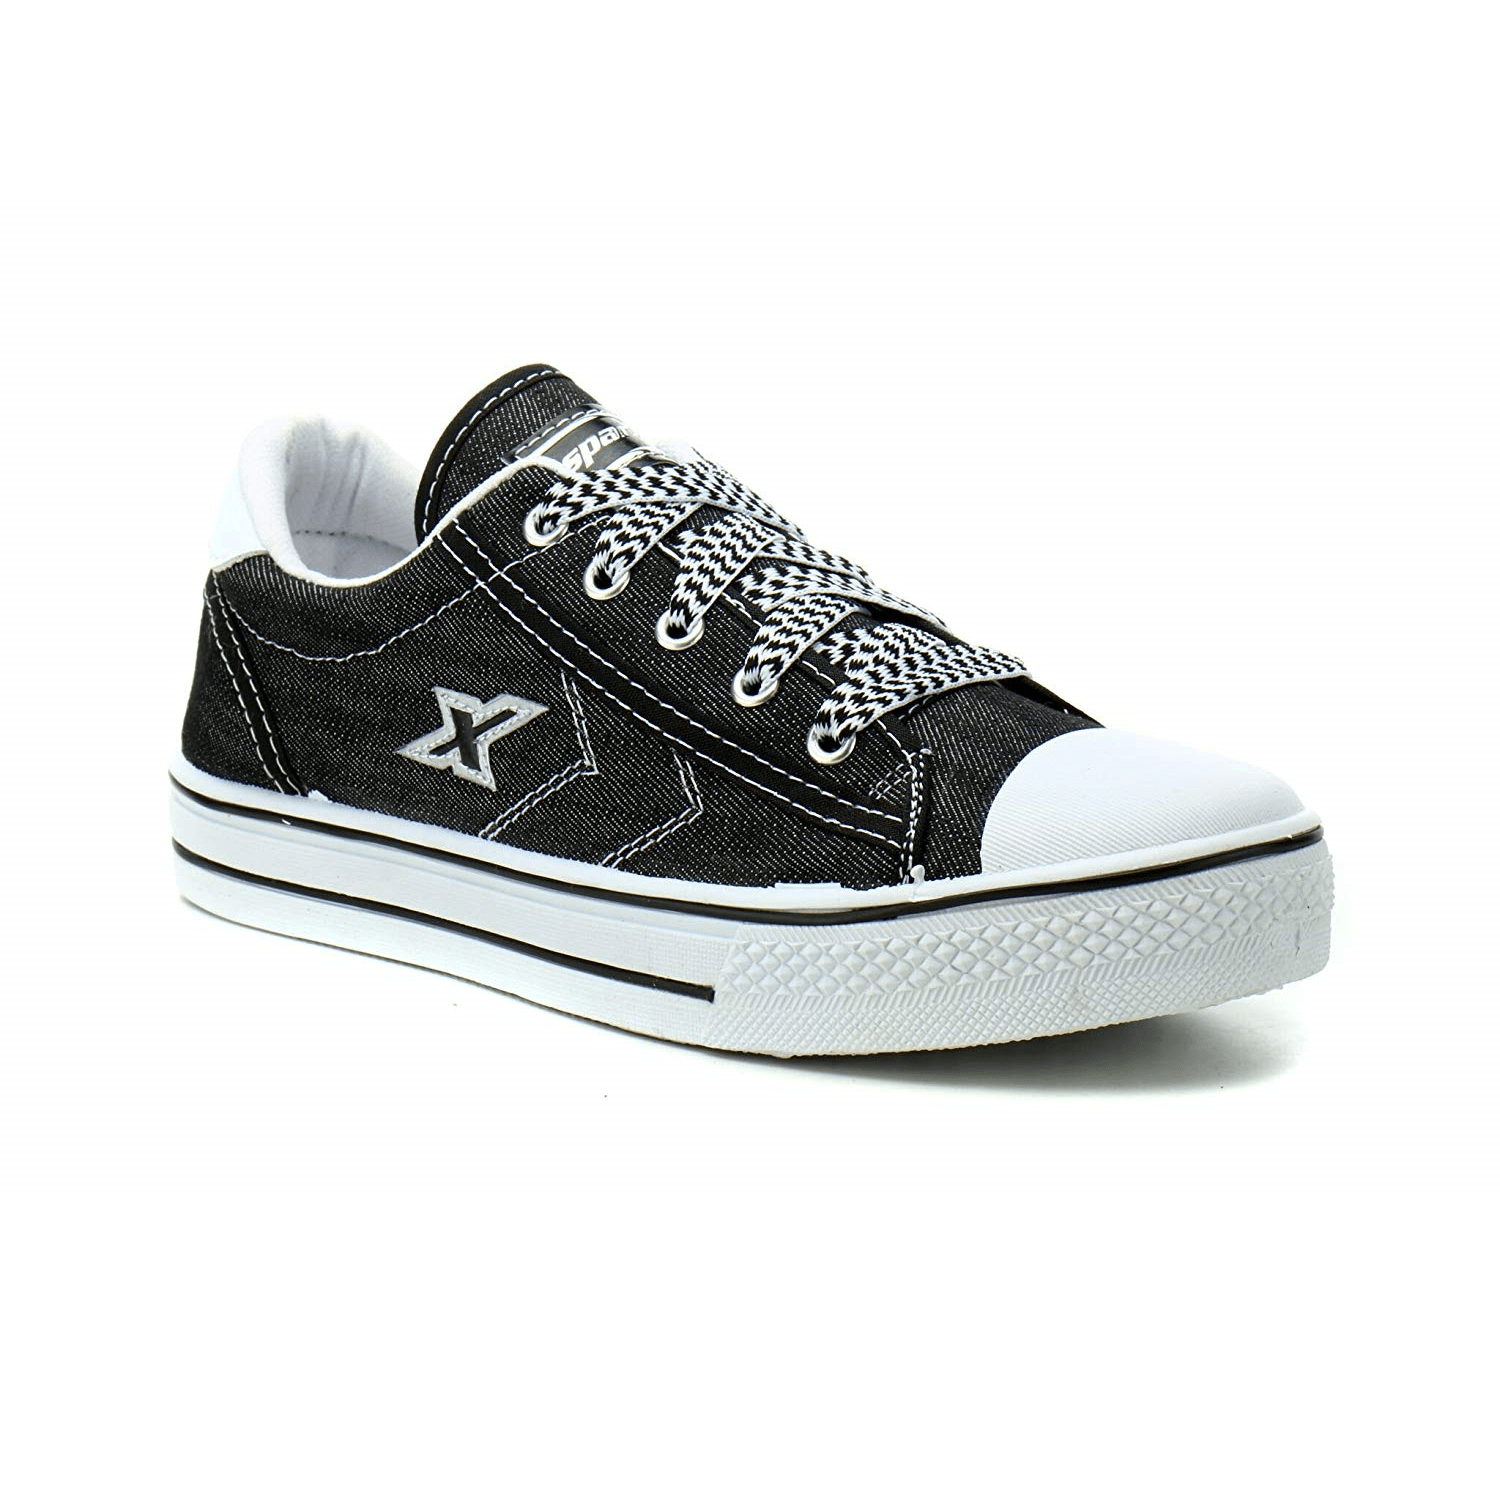 sparx shoes black and white